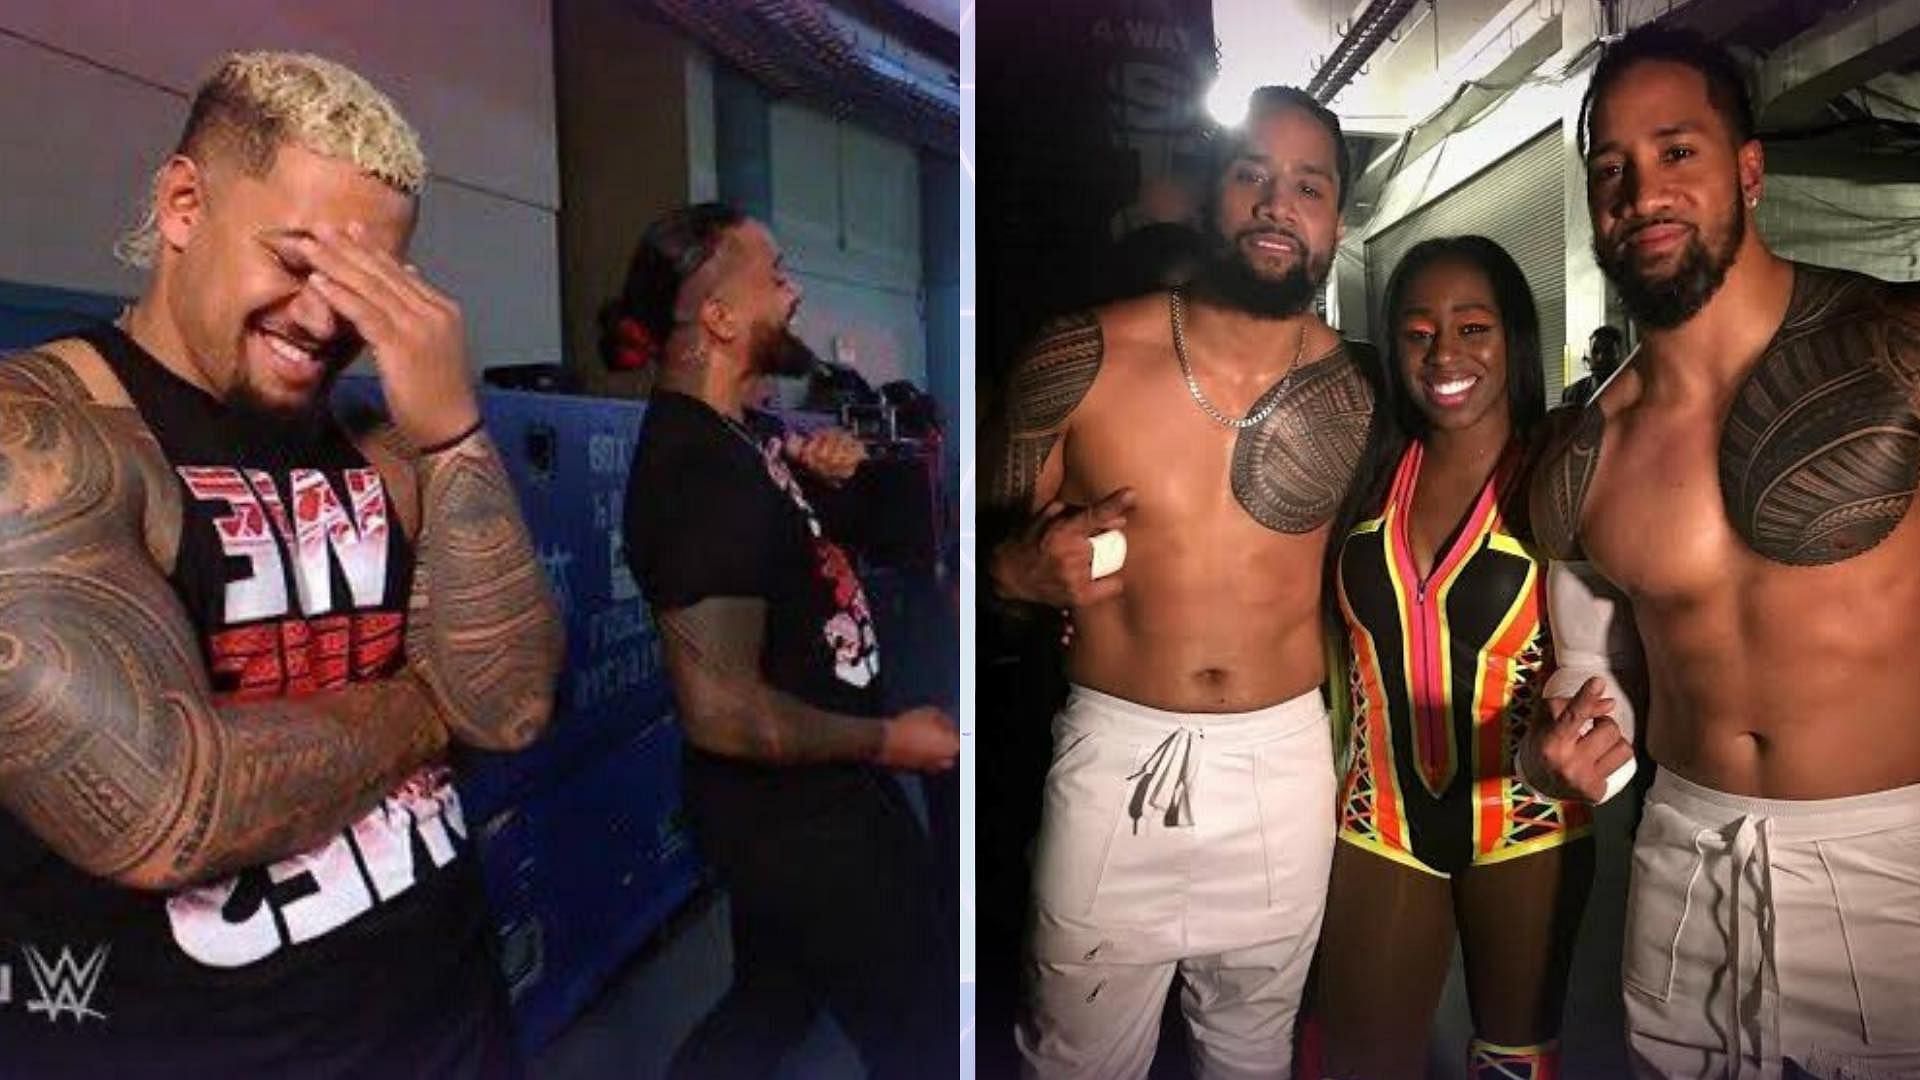 Jimmy Uso and Jey Uso are currently in a feud